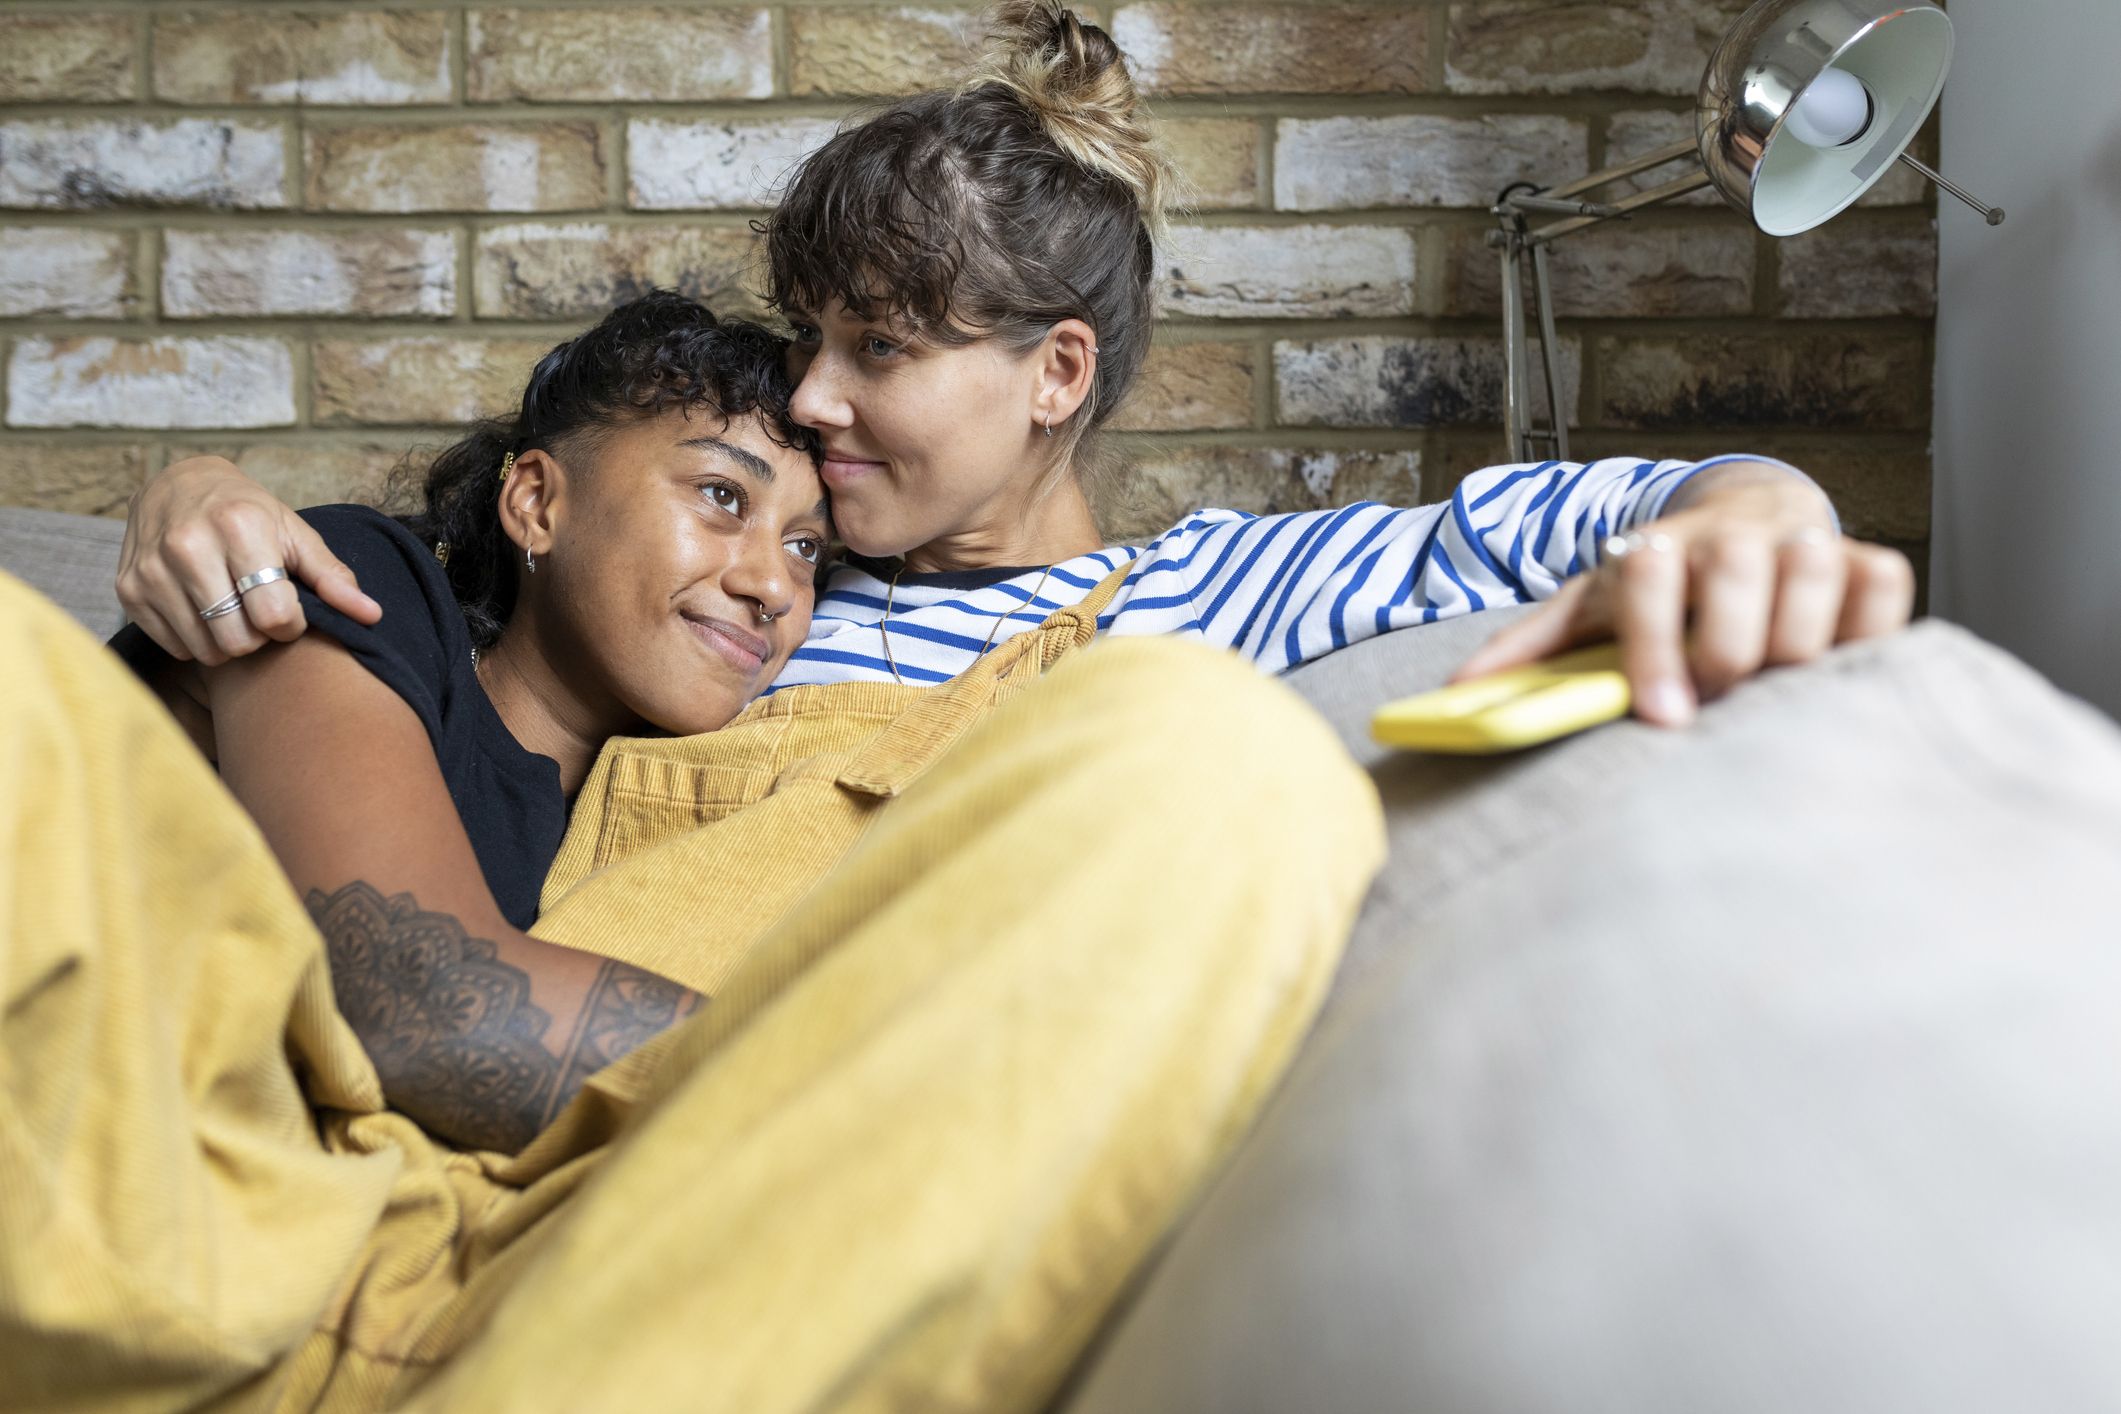 How Does Lesbians Have Sex - Am I a lesbian? How to know if you're a lesbian